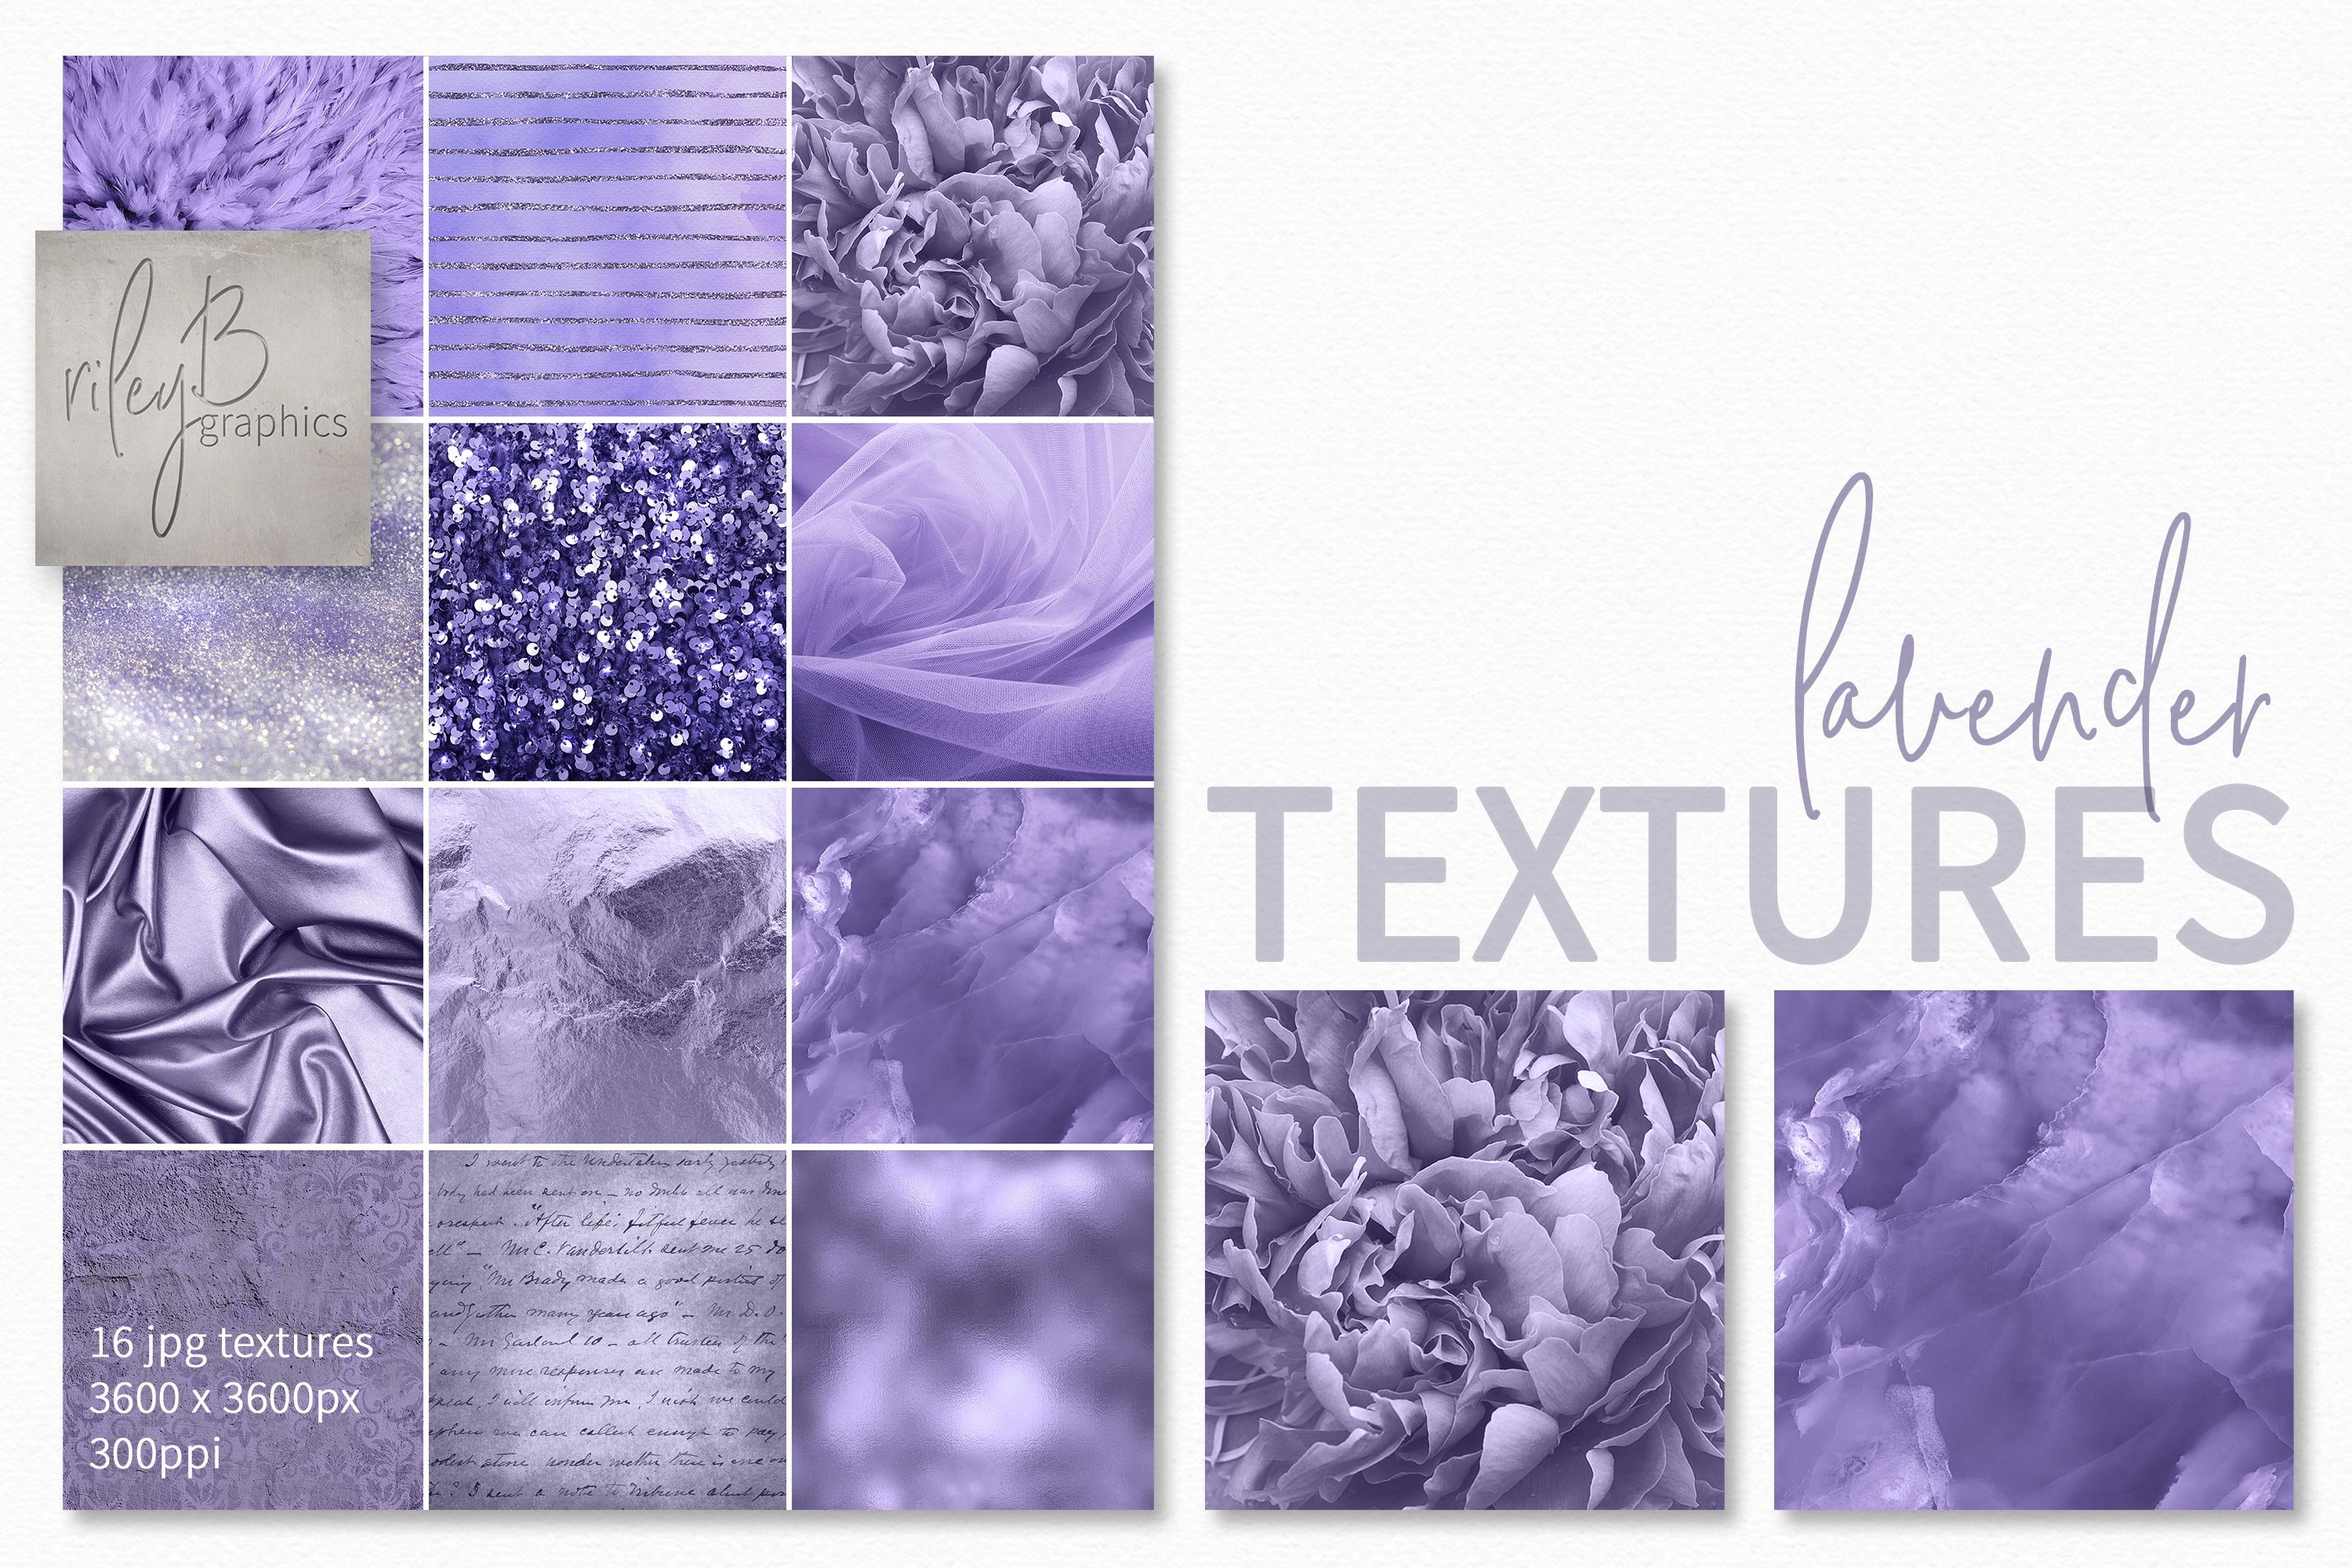 Lavender Textures cover image.